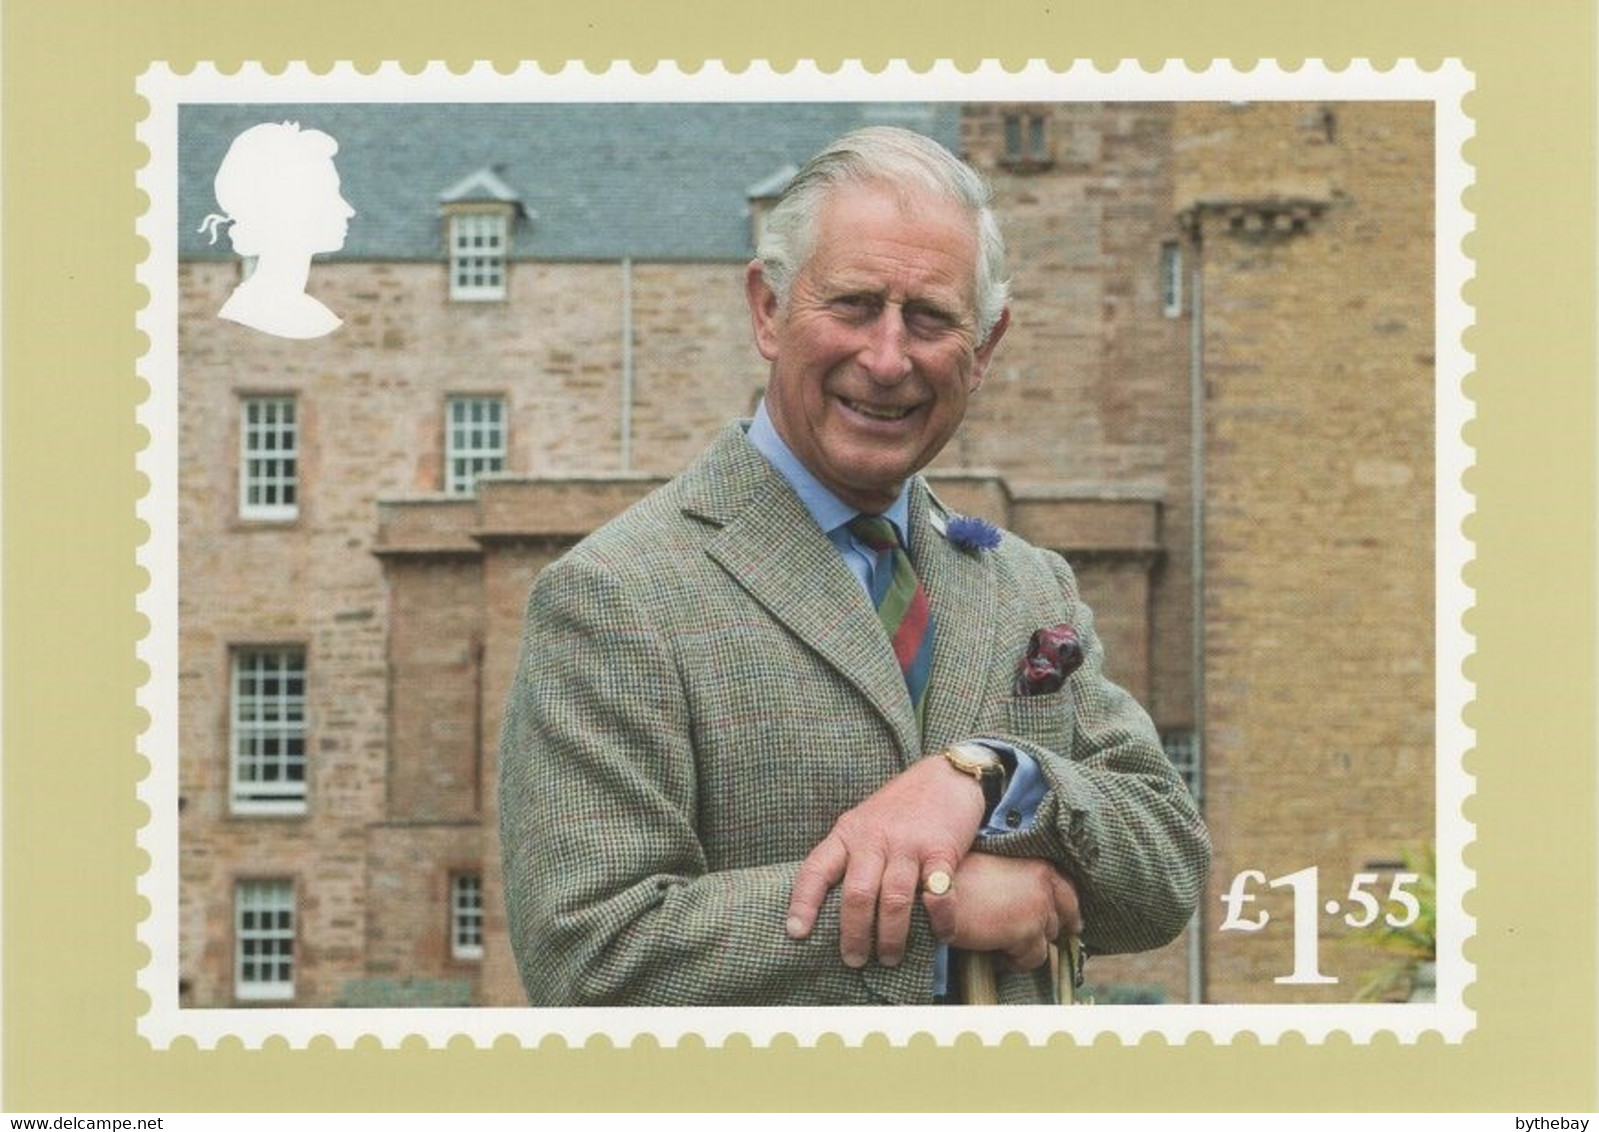 Great Britain 2018 PHQ Card Sc 3801e 1.55pd Princes Charles At Castle Of May 70th Birthday - PHQ Karten